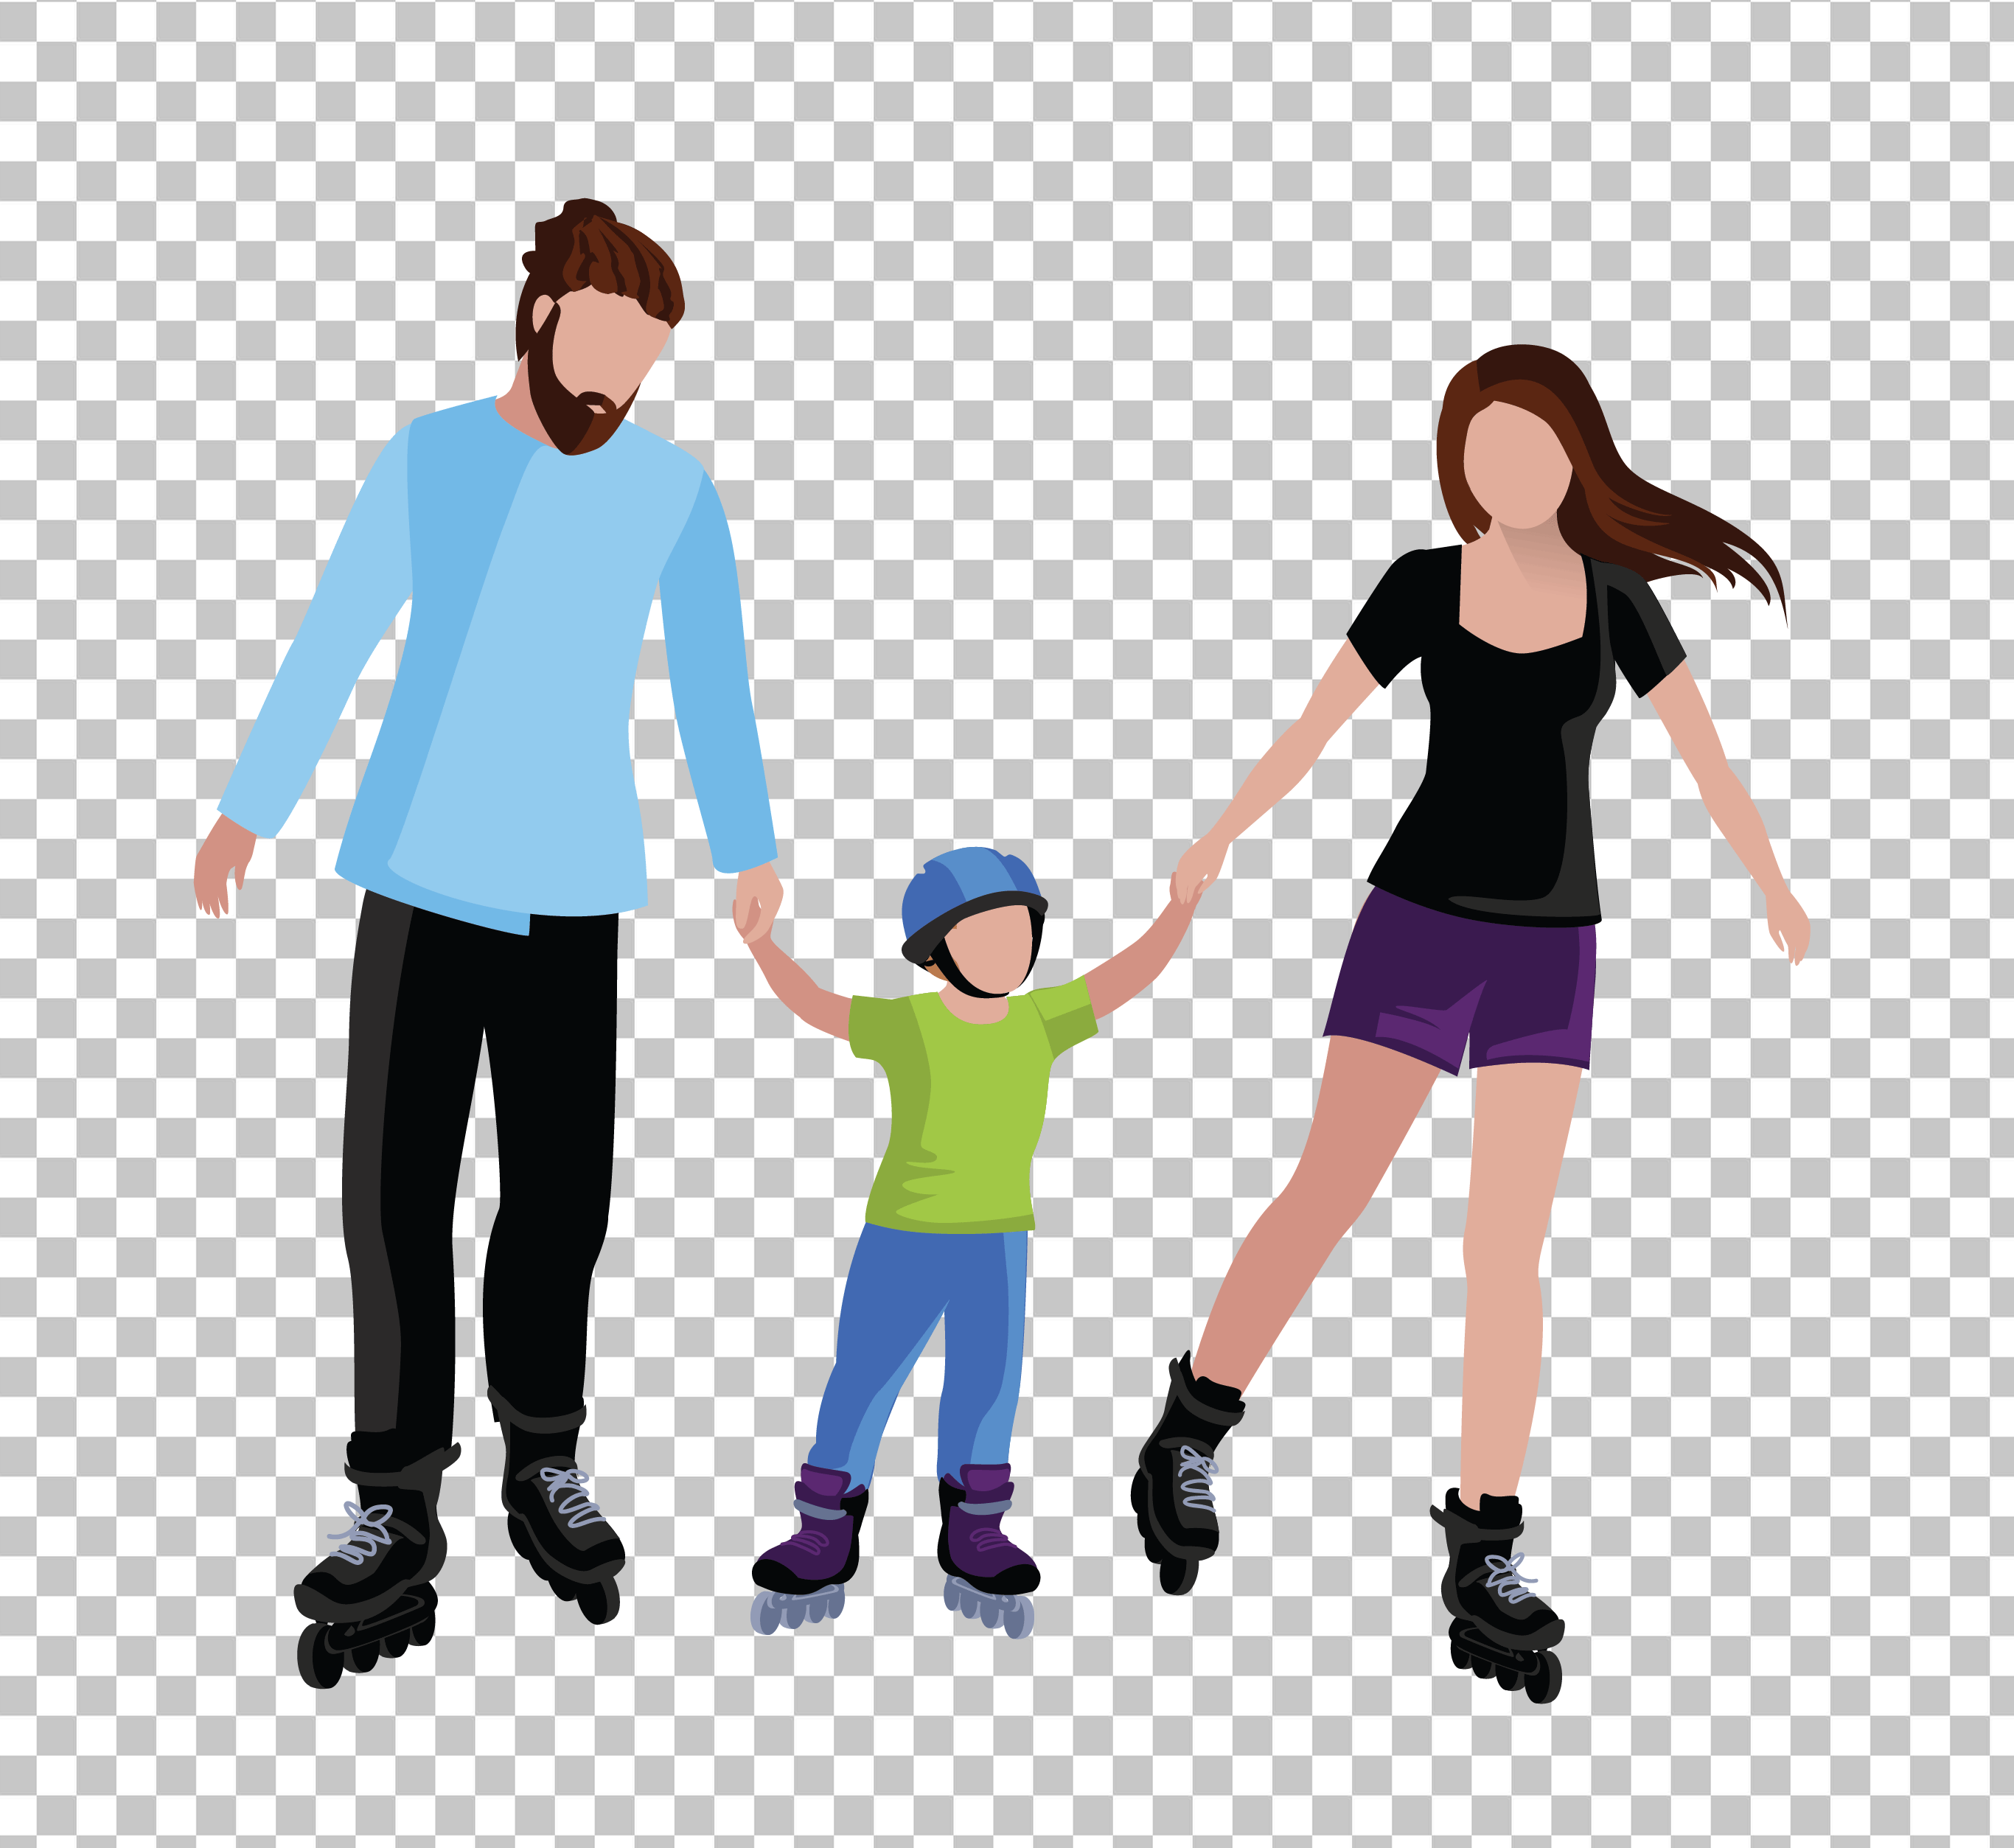 a man, a woman, and a child, all wearing roller skates.